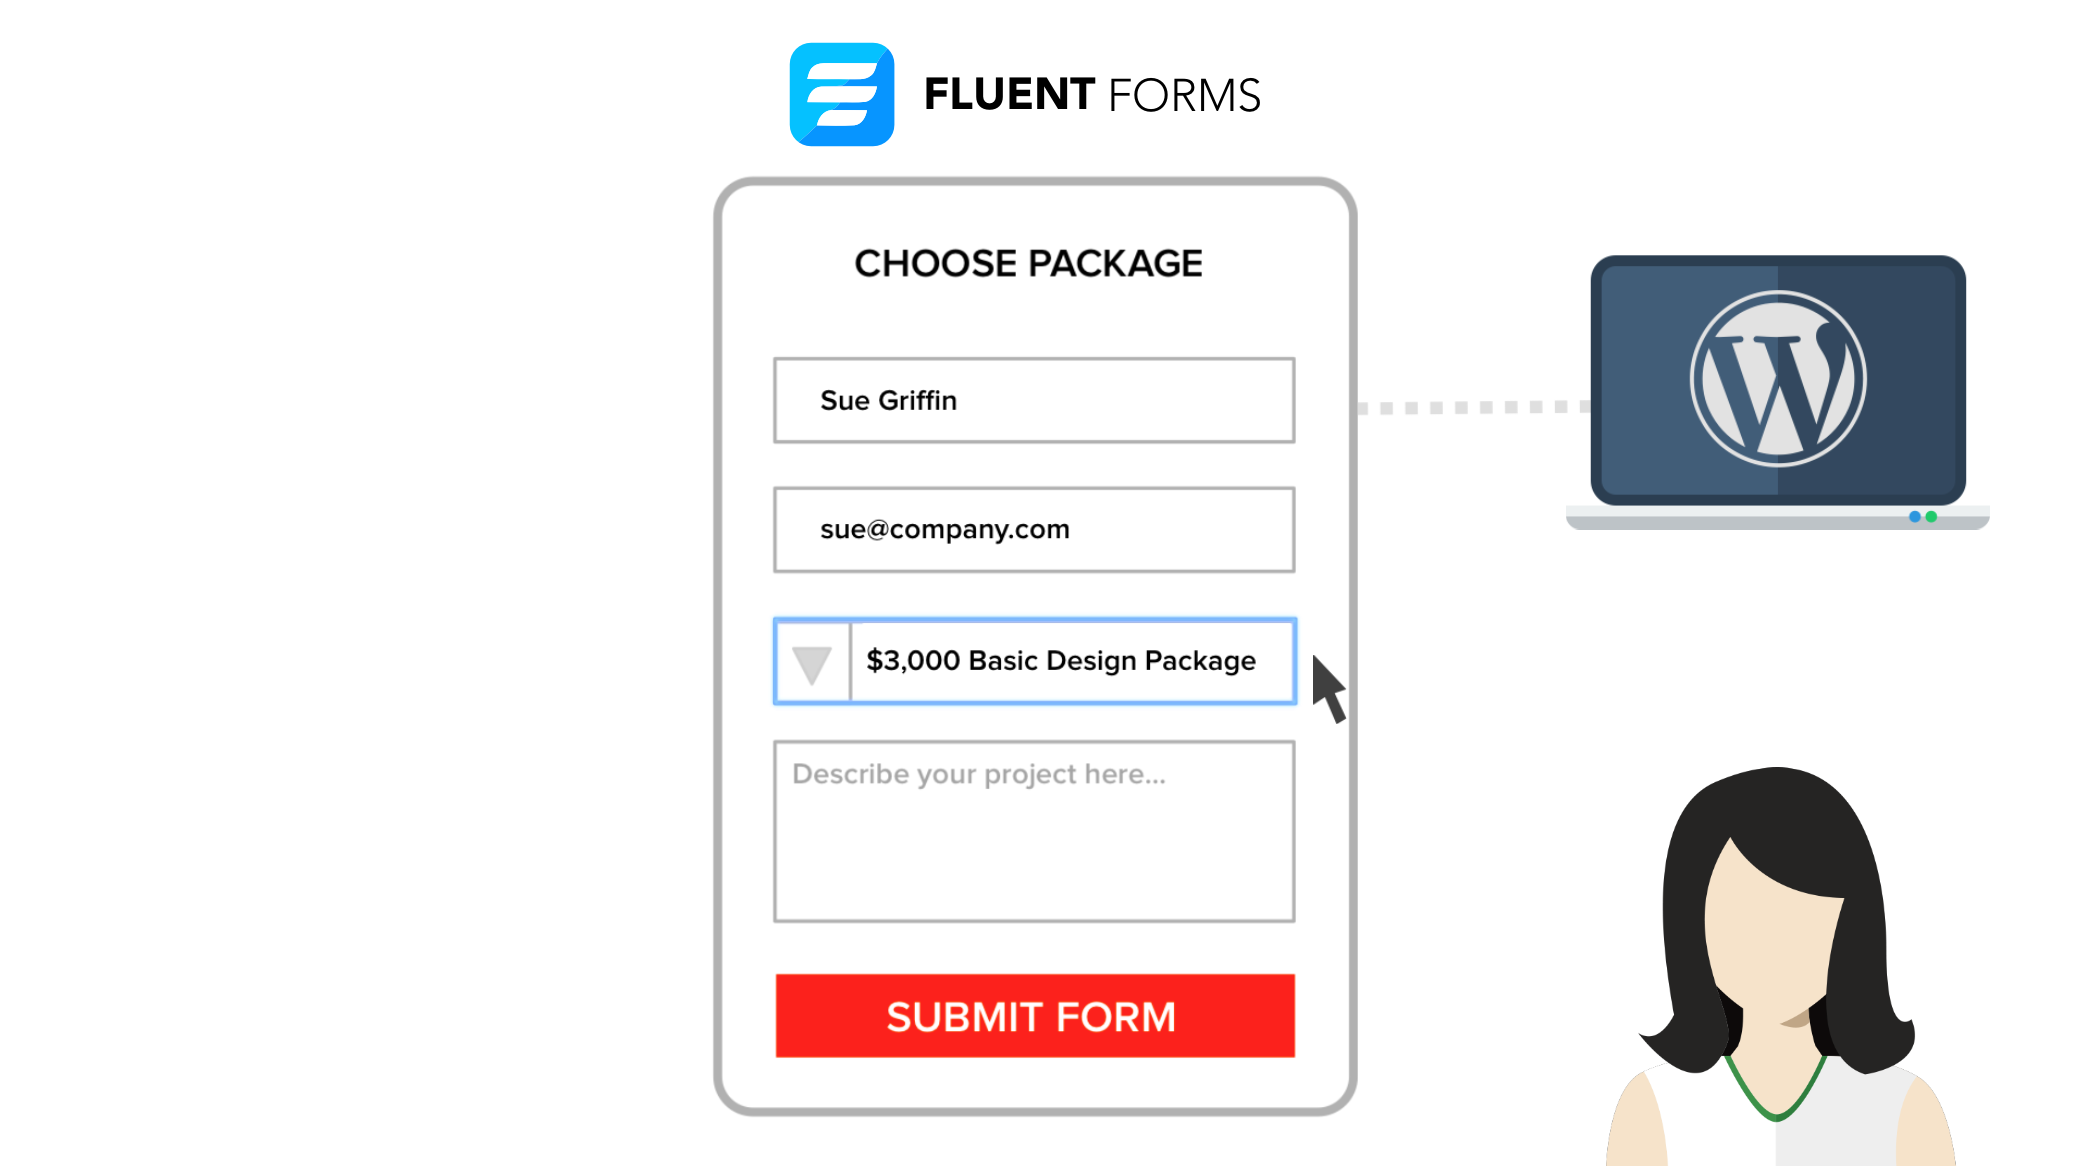 **Fluent Forms Data** If you click the Signer Input Fields icon you will see the option “Fluent Forms Data.” Click this to connect a WP Form to this contact.